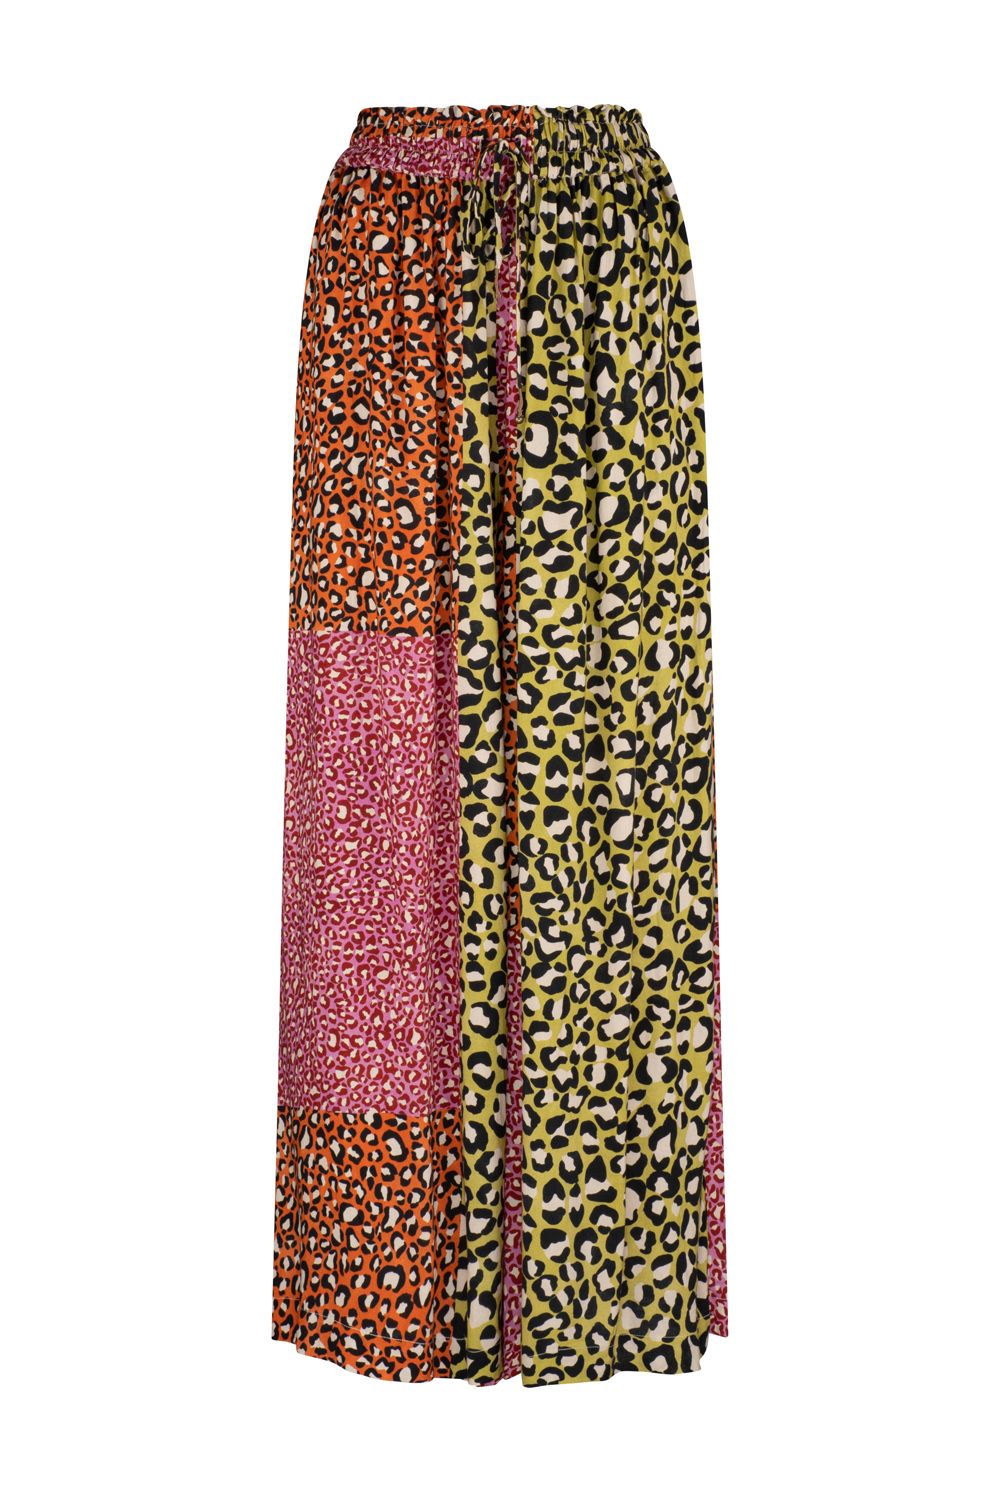 15 Eye-Catching Outfits With Animal Printed Wide Leg Pants